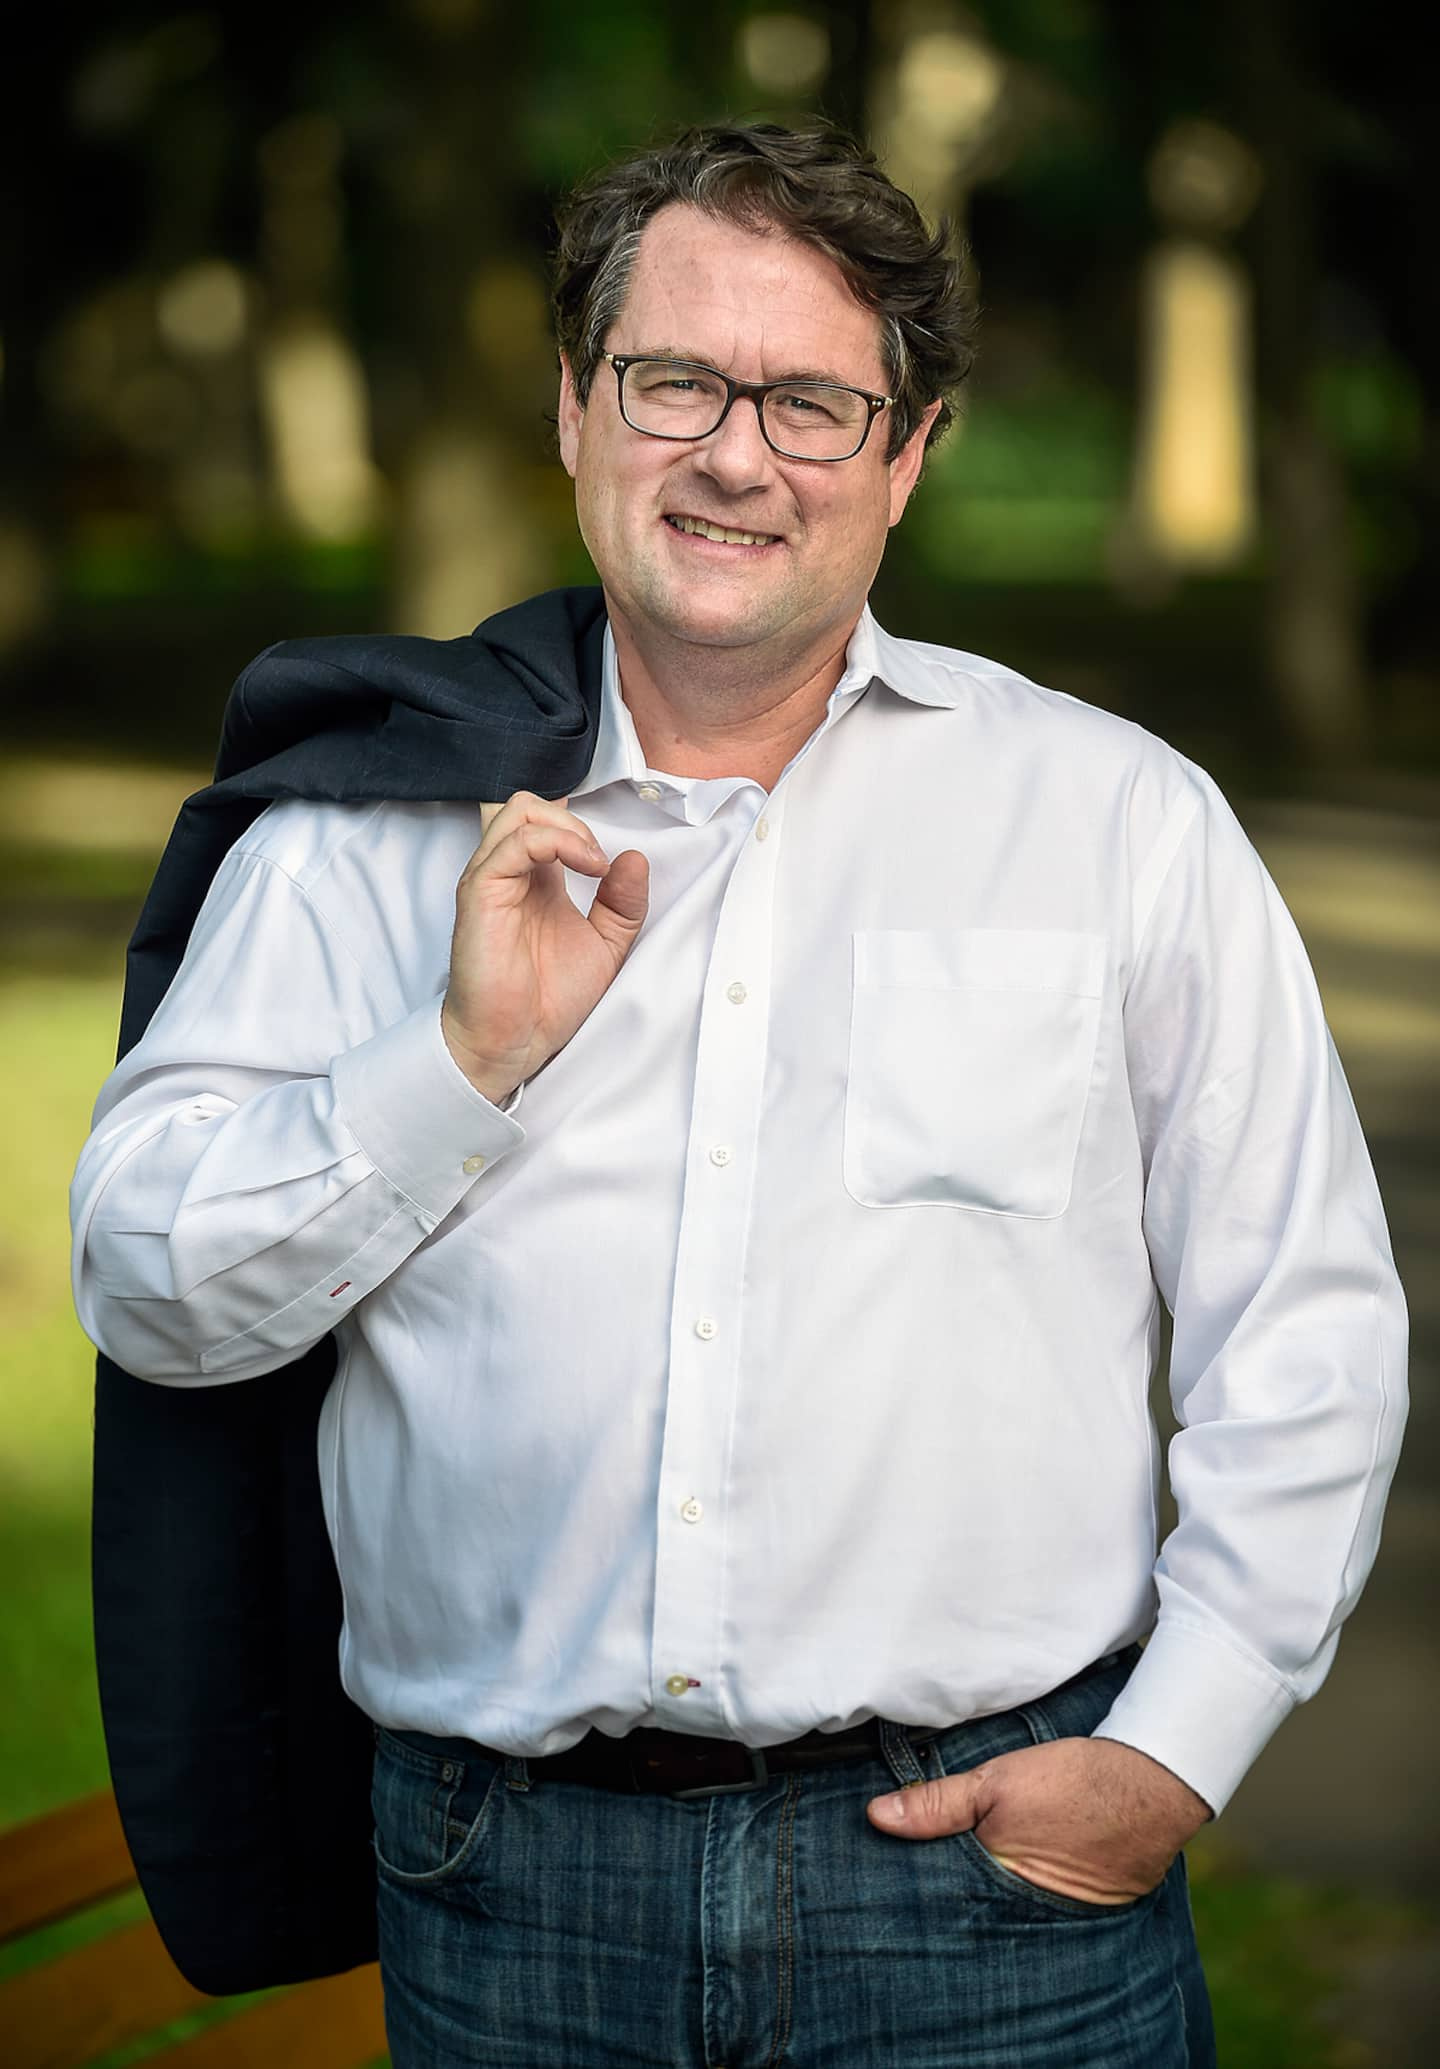 Drainville prefers a limo to its principles